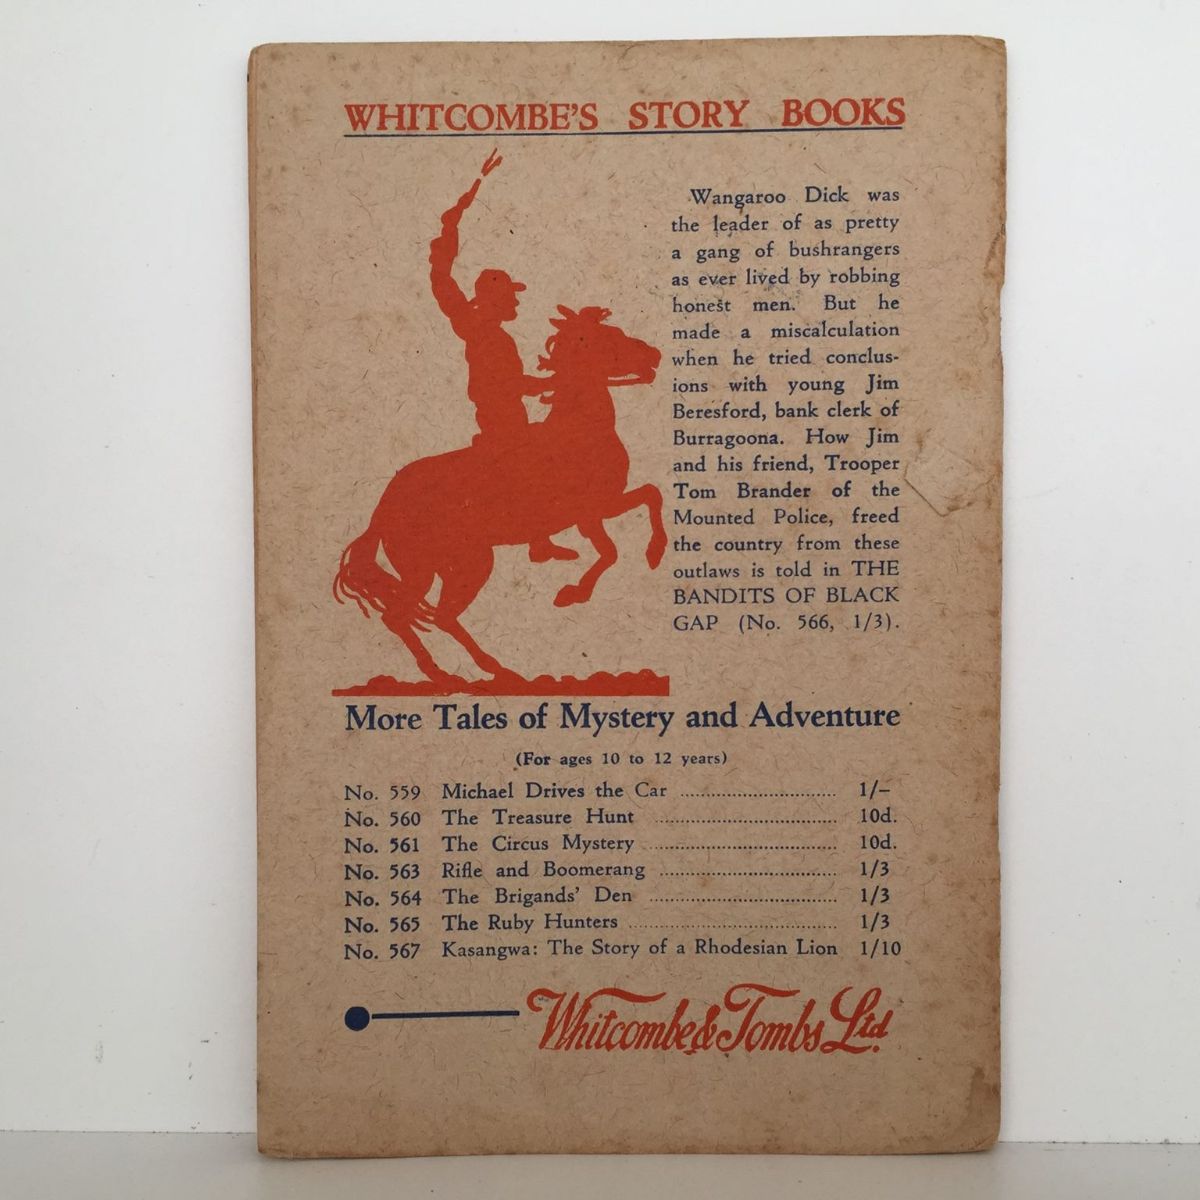 LITTLE NATURE STORIES: Whitcombe's Story Books No 224